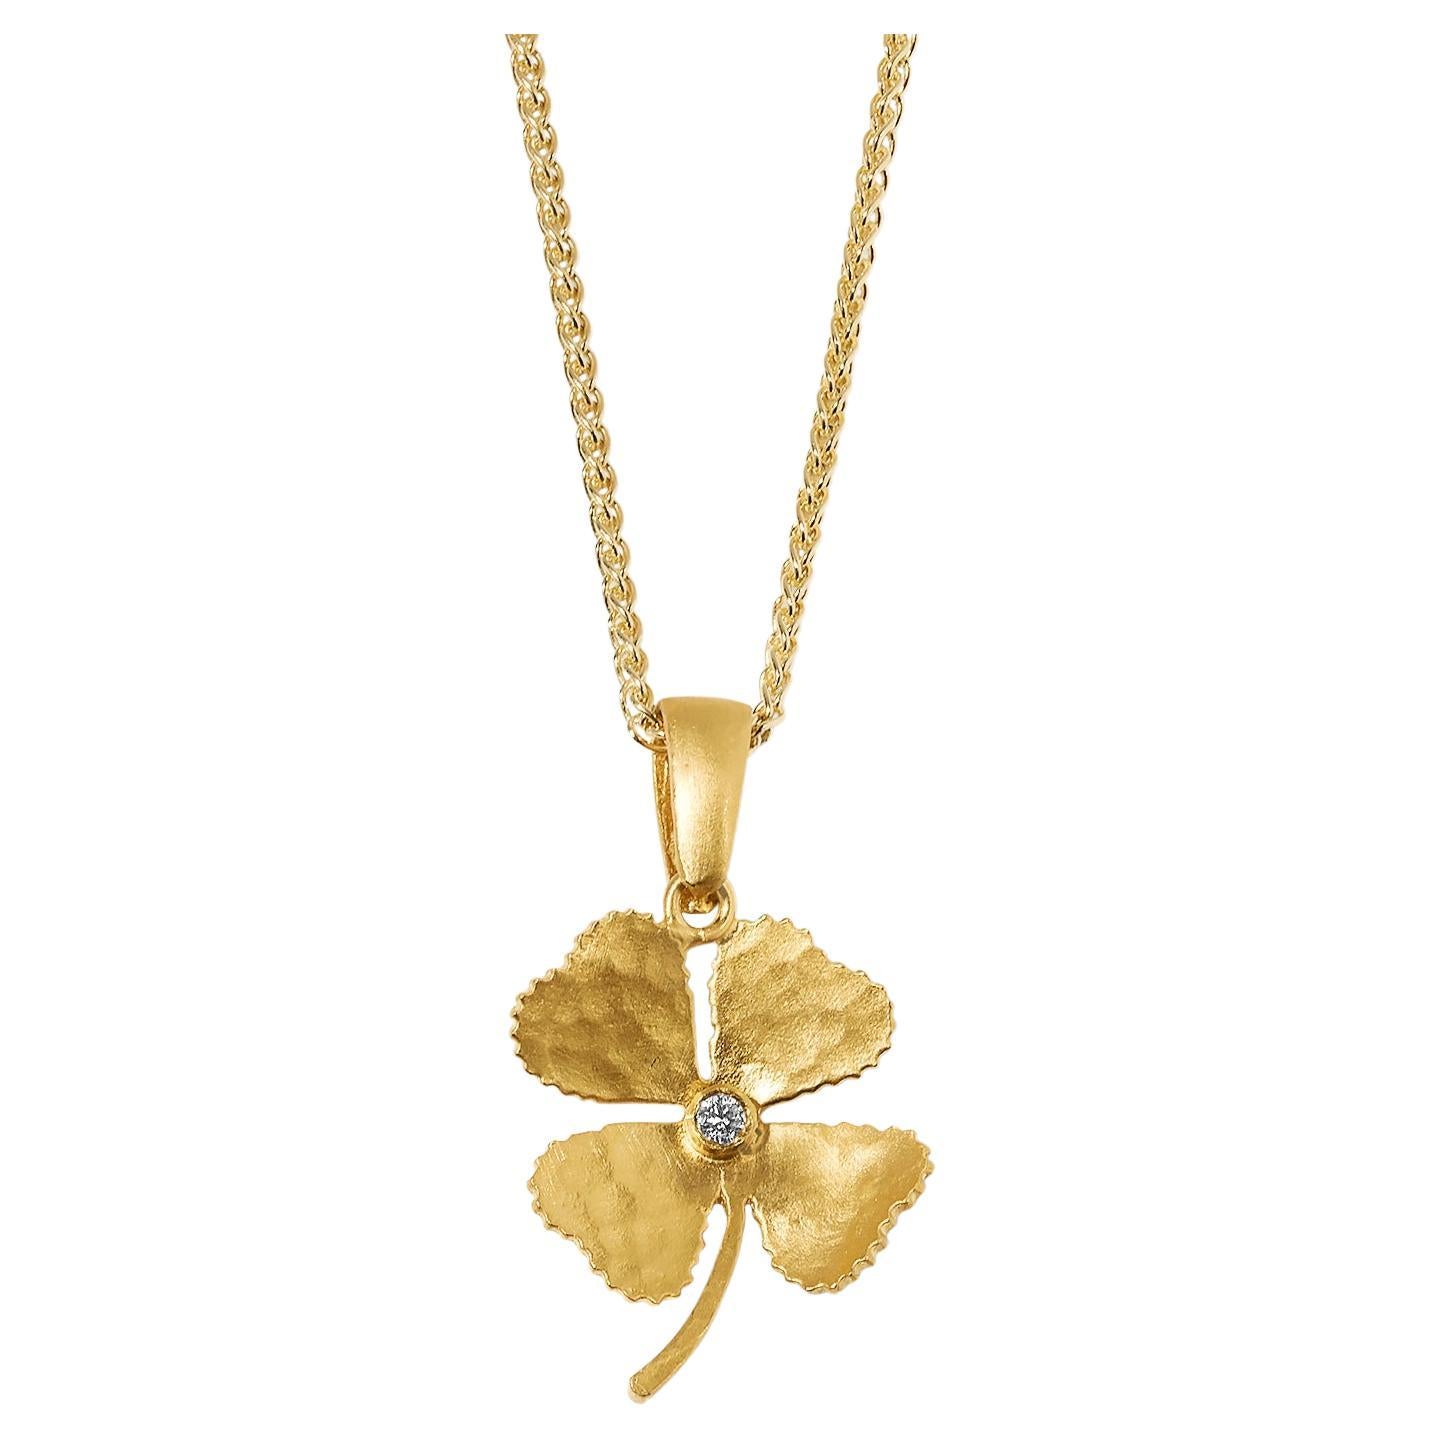 Small, Four Leaf Clover Charm Pendant Necklace with Center Diamond, 24kt Gold For Sale